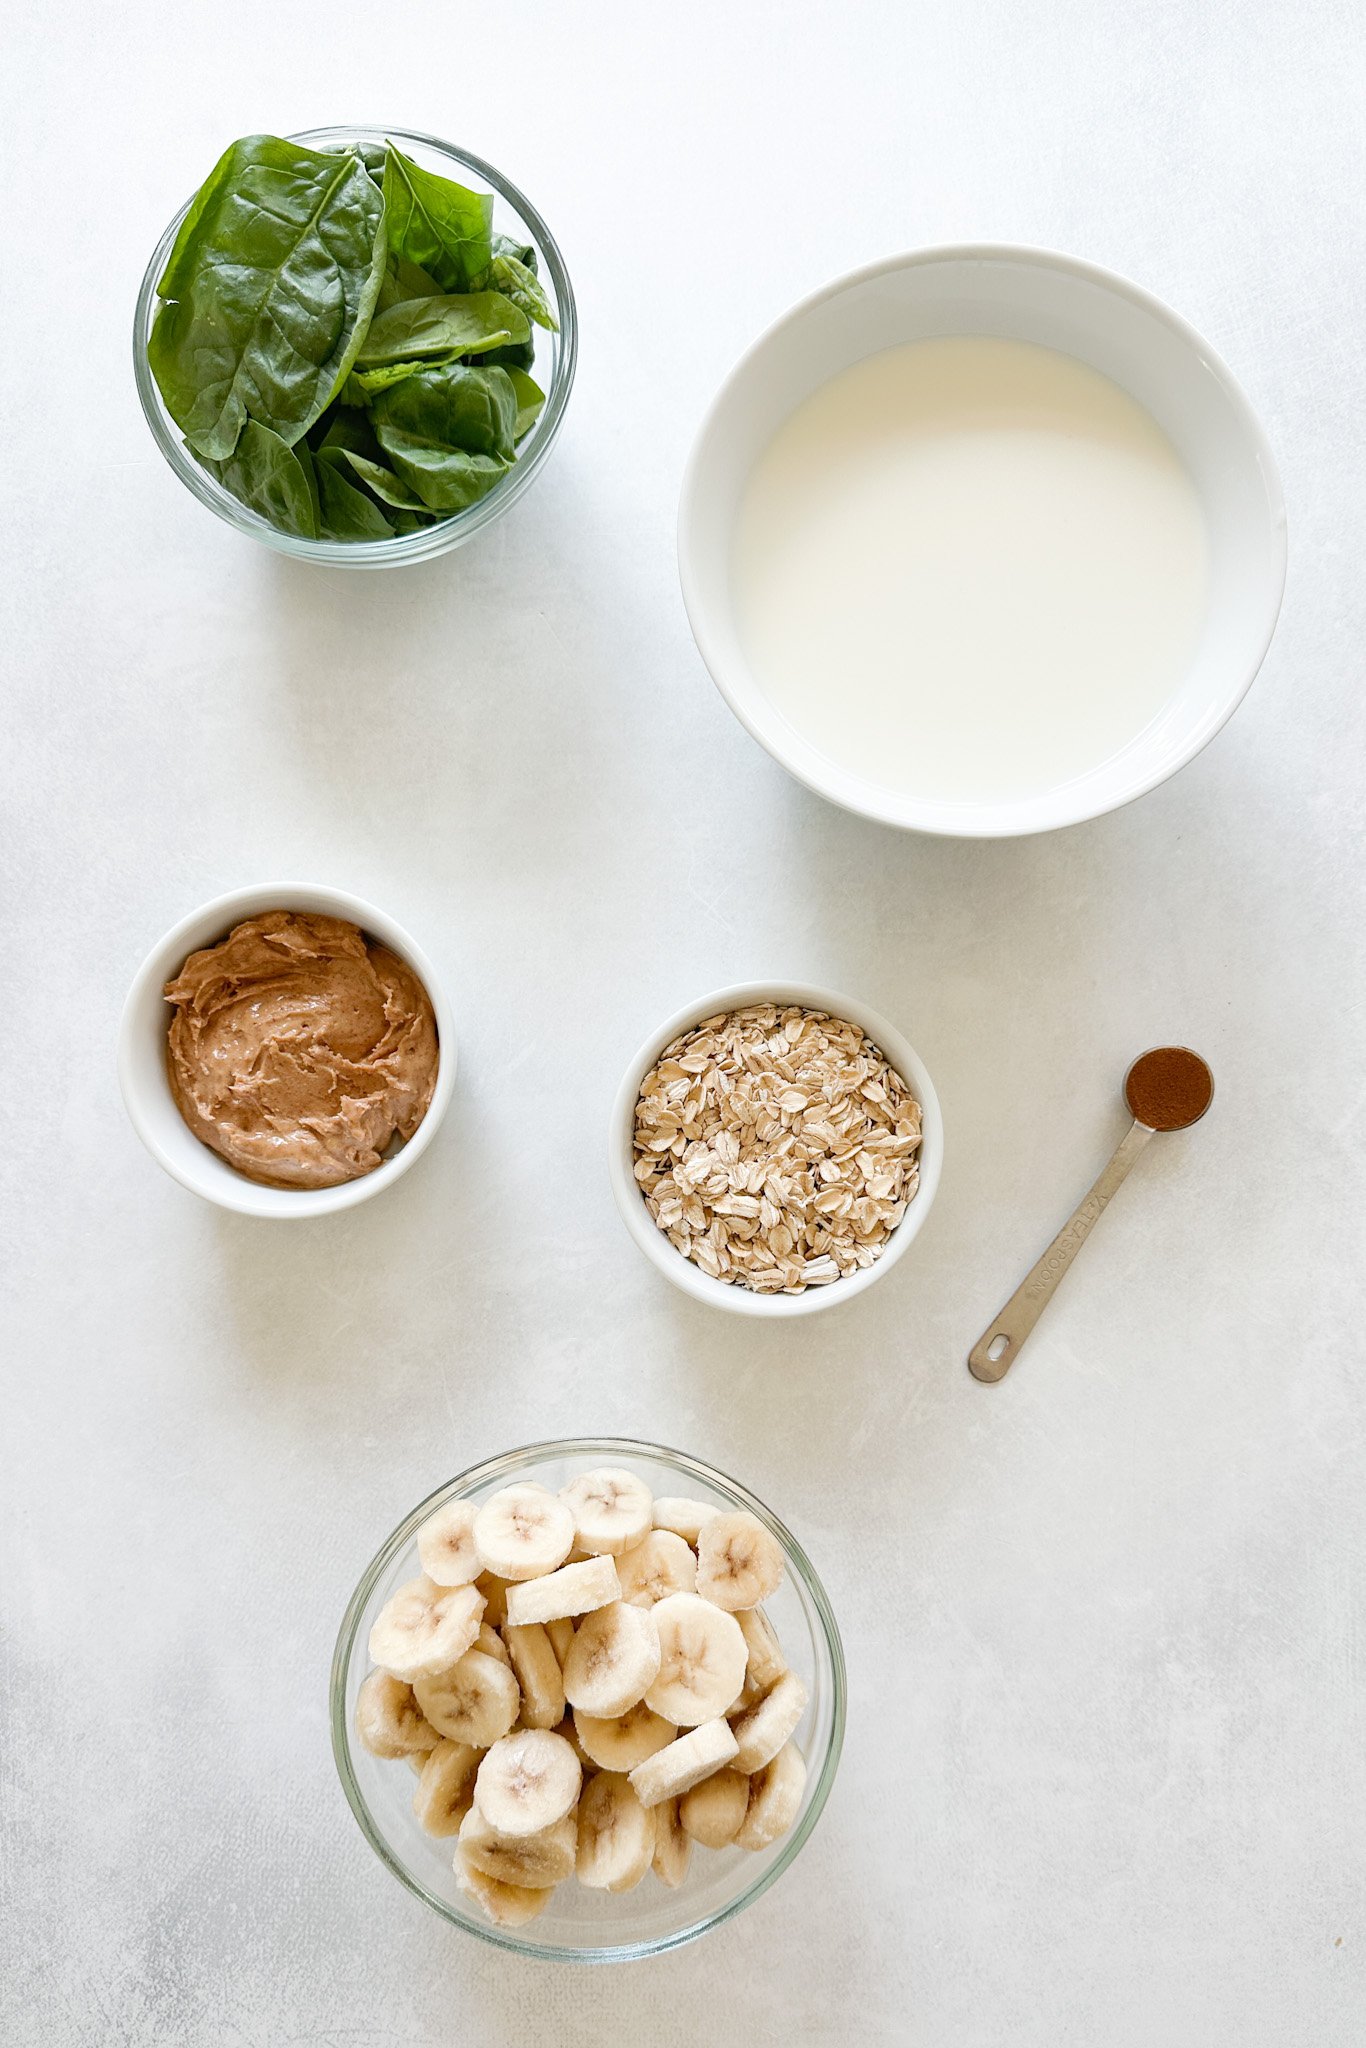 Ingredients to make spinach banana smoothie.